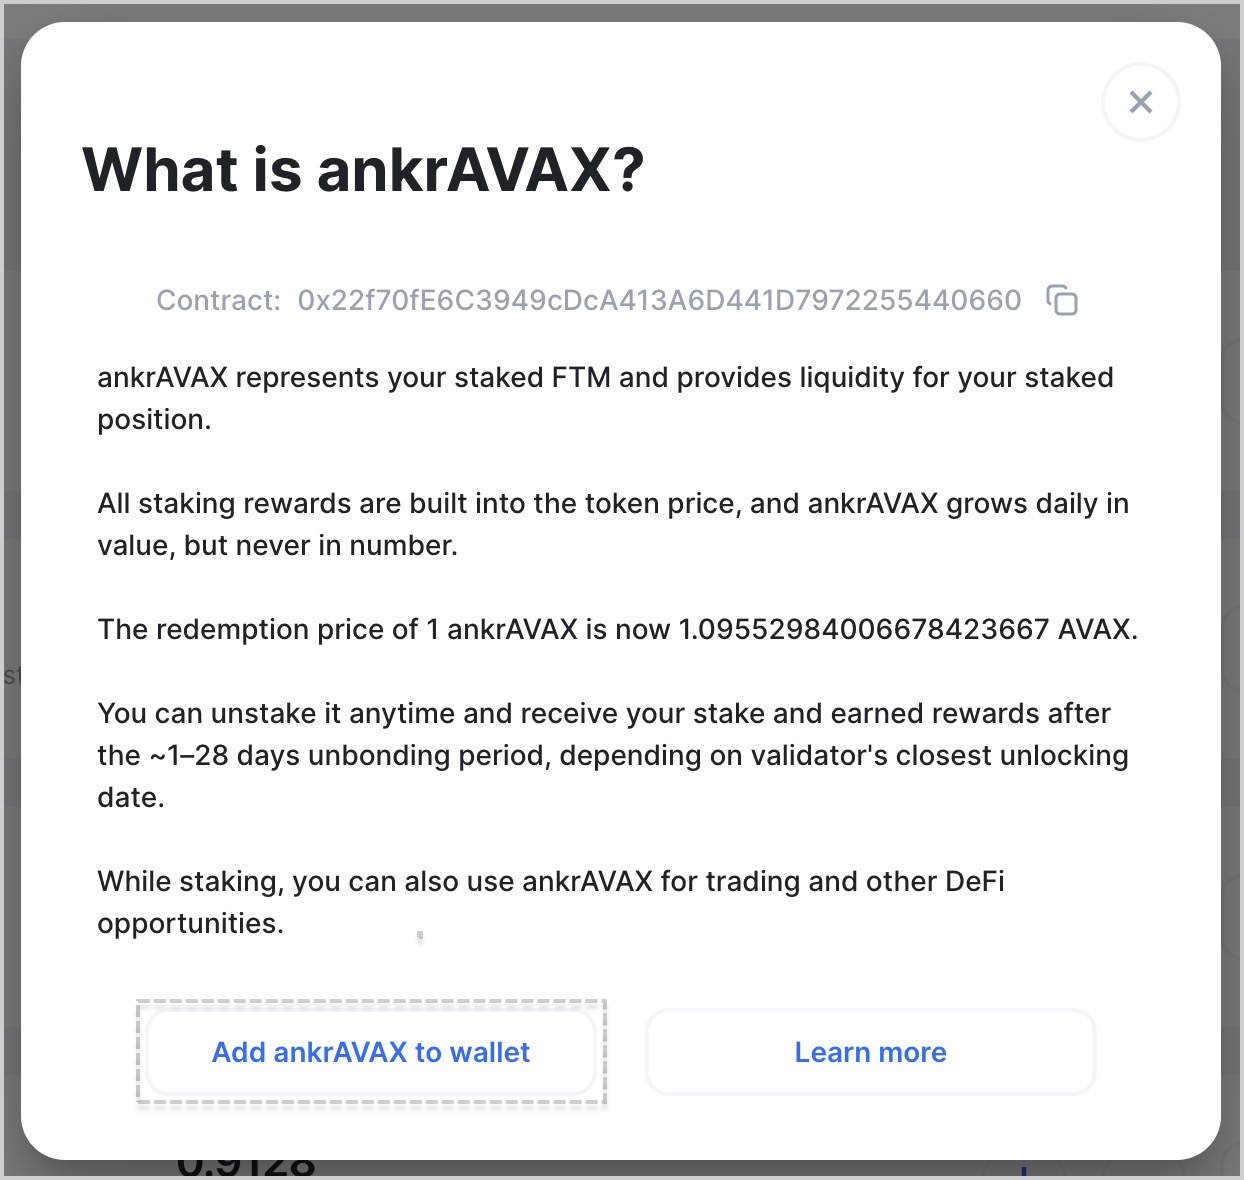 Click Add ankAVAX to wallet